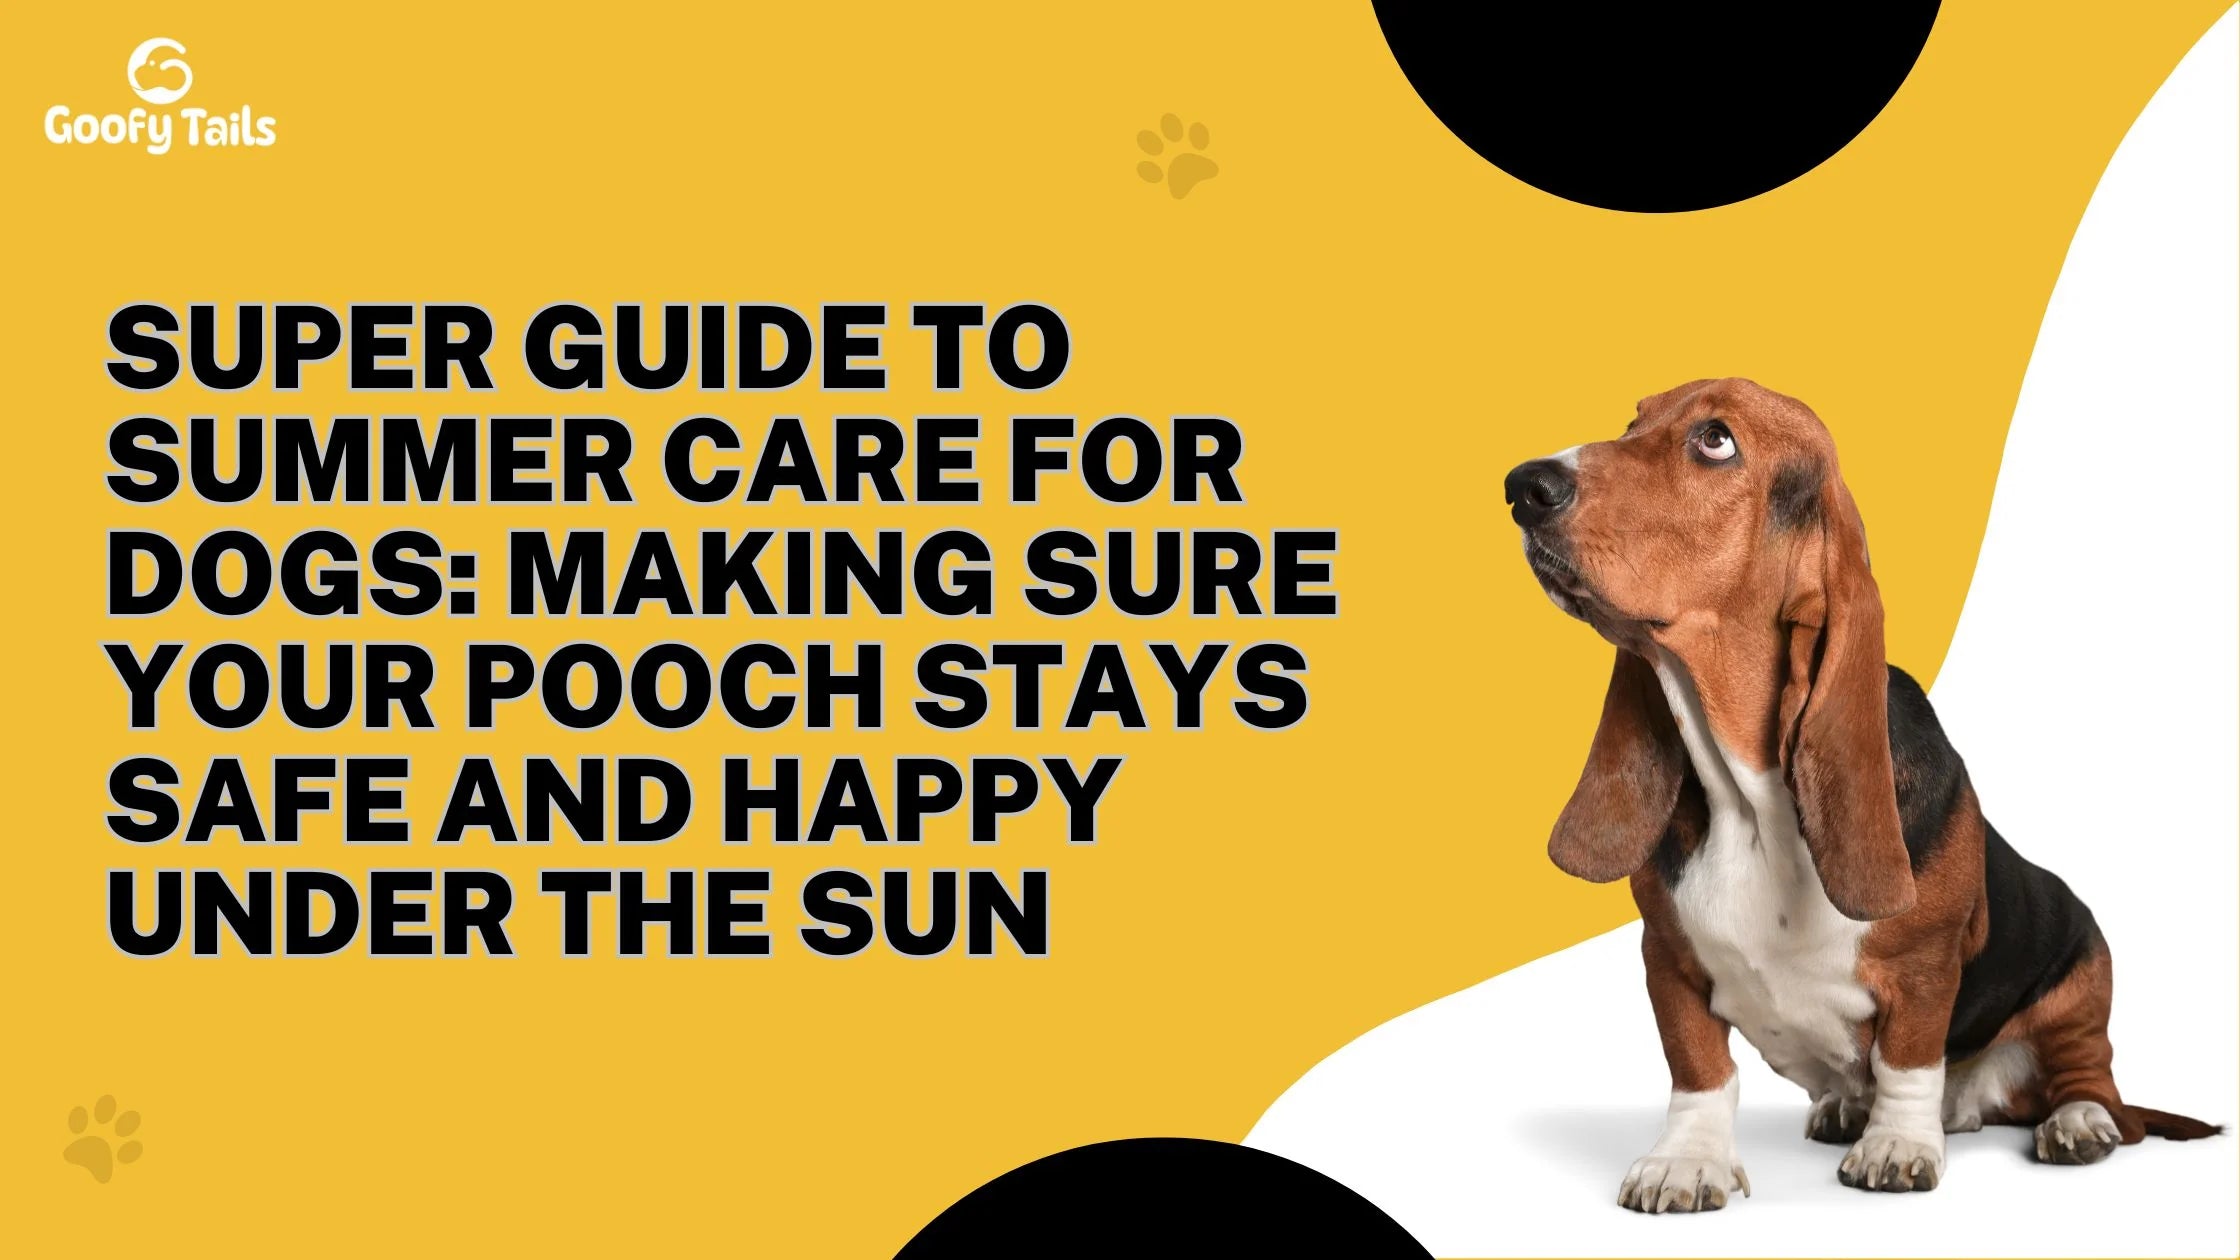 Super Guide to Summer Care for Dogs: Making Sure Your Pooch Stays Safe and Happy Under the Sun